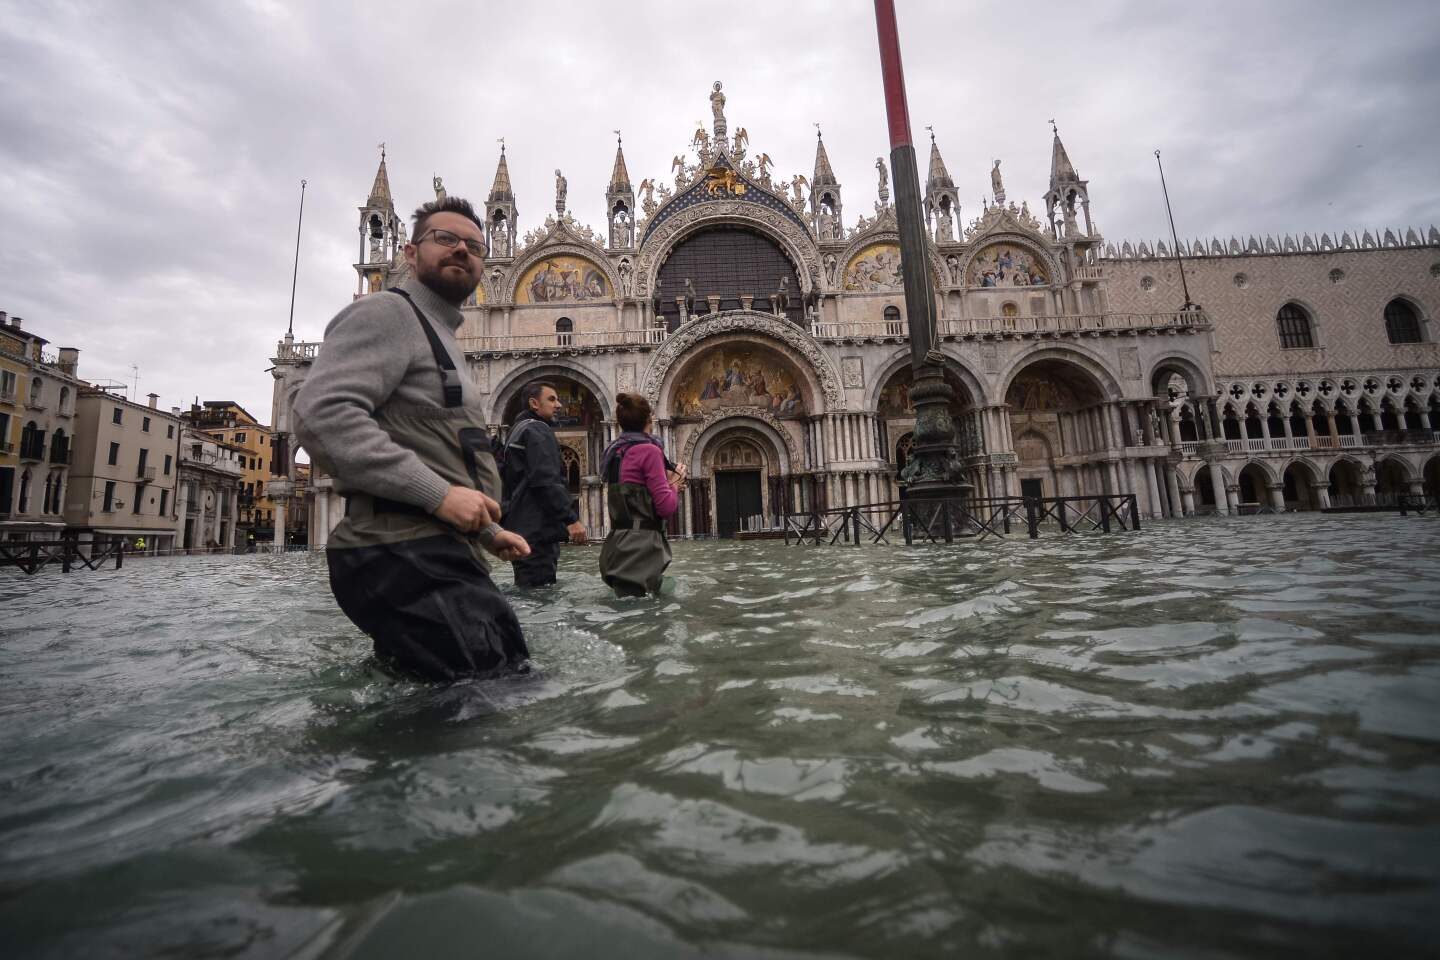 A general view shows people walking across the flooded St. Mark's Square, by St. Mark's Basilica on November 15, 2019 in Venice, two days after the city suffered its highest tide in 50 years. - Flood-hit Venice was bracing for another exceptional high tide on November 15, as Italy declared a state of emergency for the UNESCO city where perilous deluges have caused millions of euros worth of damage. (Photo by Filippo MONTEFORTE / AFP) (Photo by FILIPPO MONTEFORTE/AFP via Getty Images) ** OUTS - ELSENT, FPG, CM - OUTS * NM, PH, VA if sourced by CT, LA or MoD **